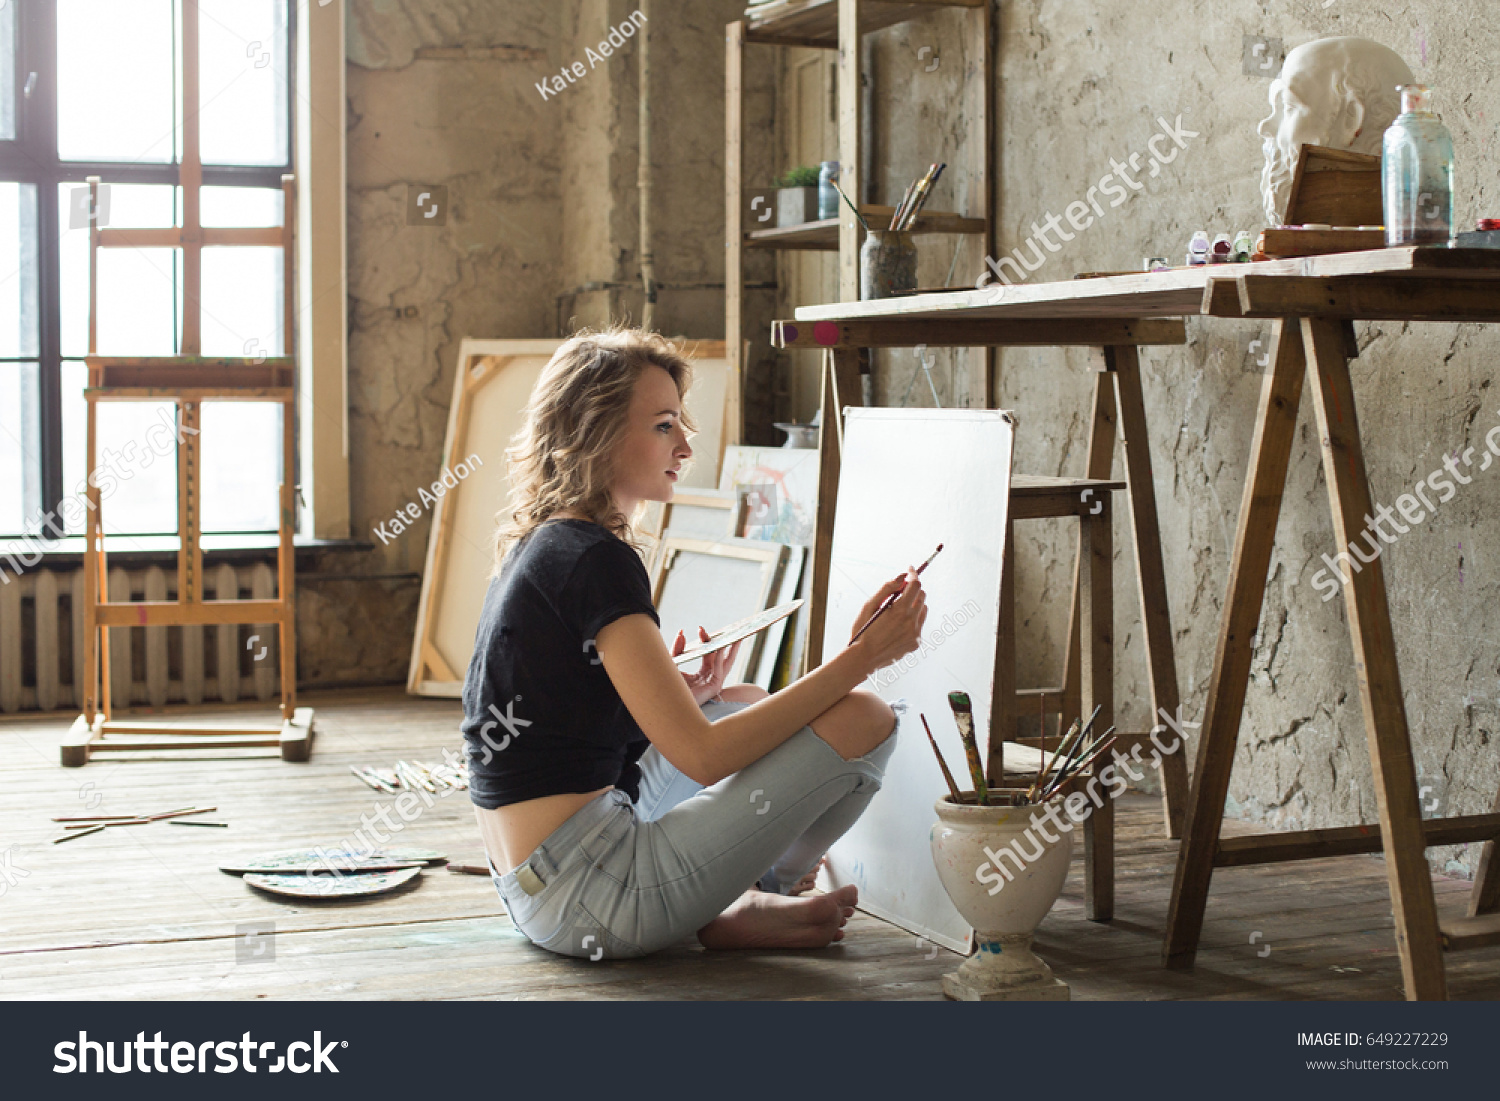 Woman painter sitting on the floor in front of the canvas and drawing. Artist studio interior. Drawing supplies, oil paints, artist brushes, canvas, frame. Workshop or art class. Creative concept #649227229